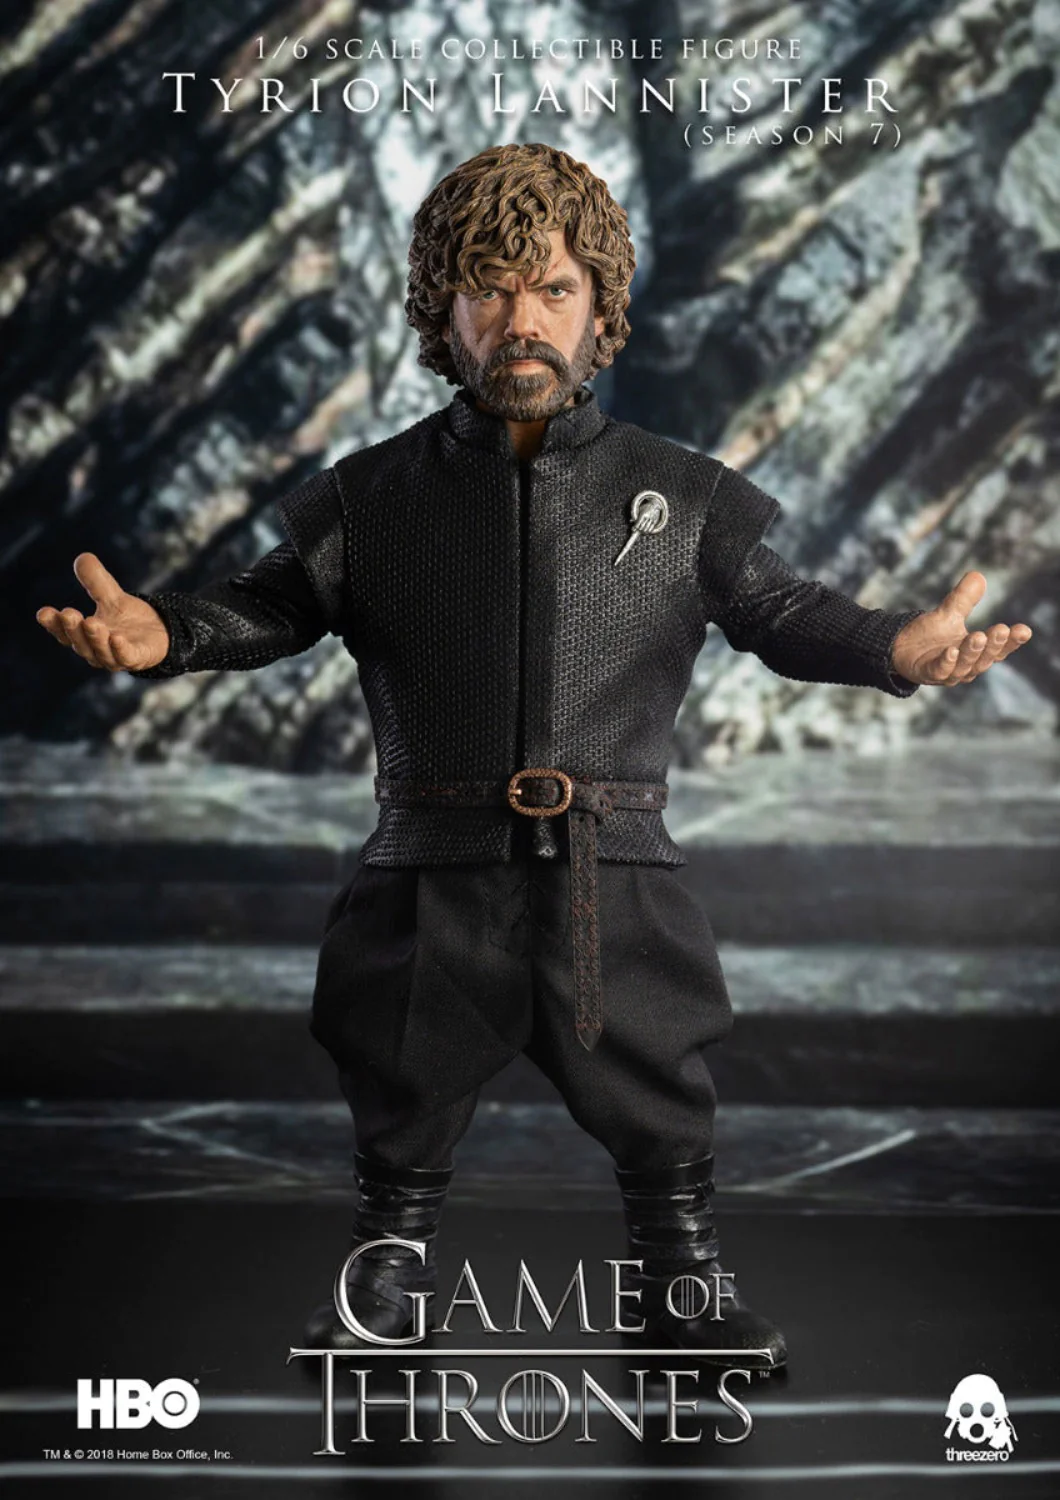 GAME OF THRONES TYRION LANNISTER 1/6 DELUXE VERSION